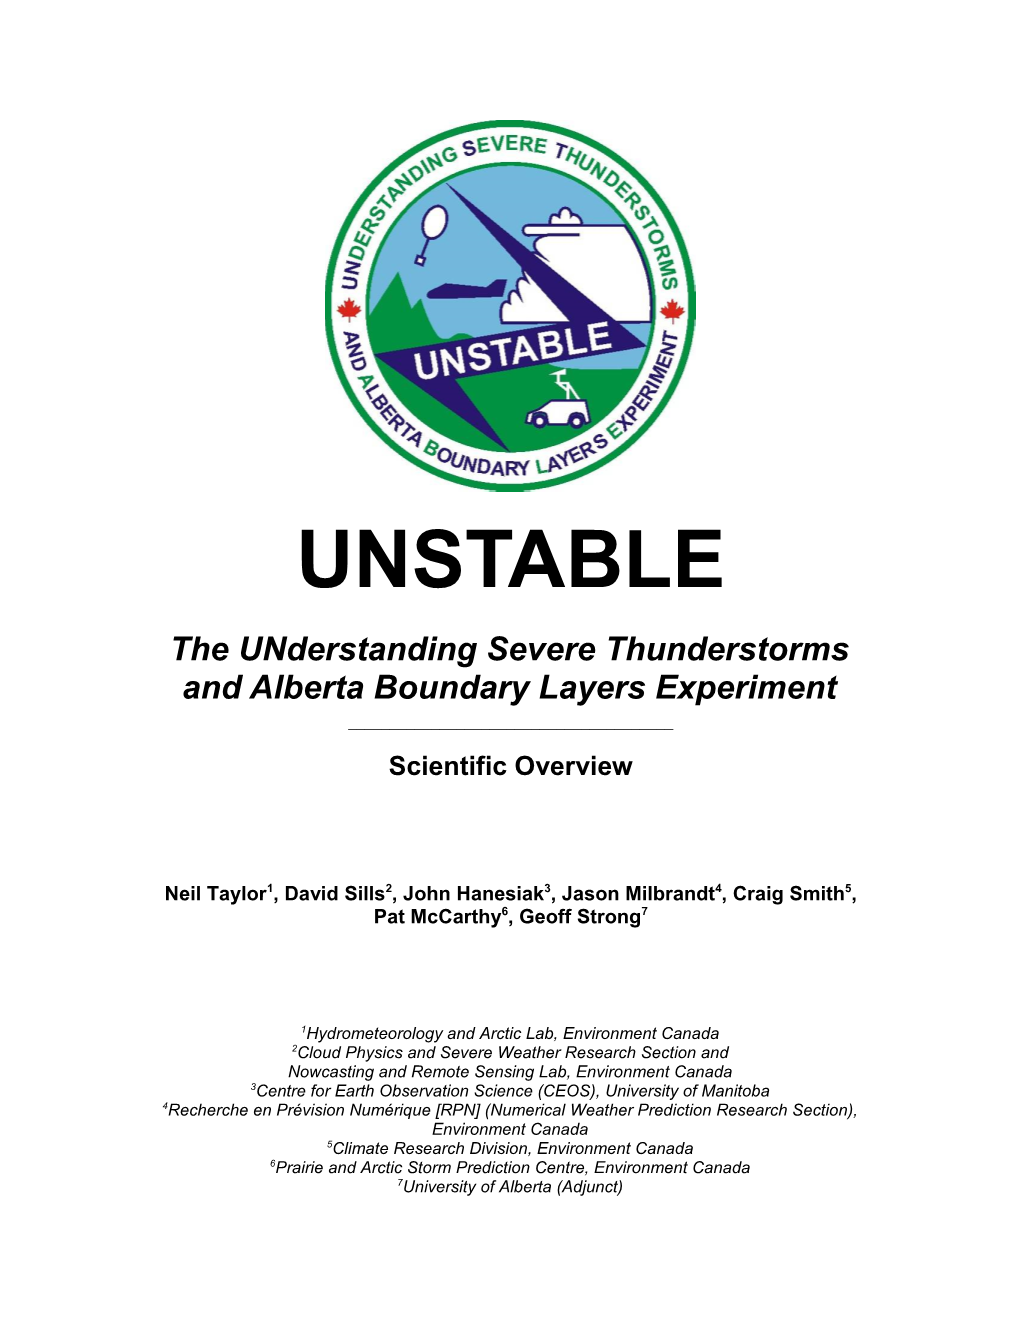 UNSTABLE the Understanding Severe Thunderstorms and Alberta Boundary Layers Experiment ______Scientific Overview